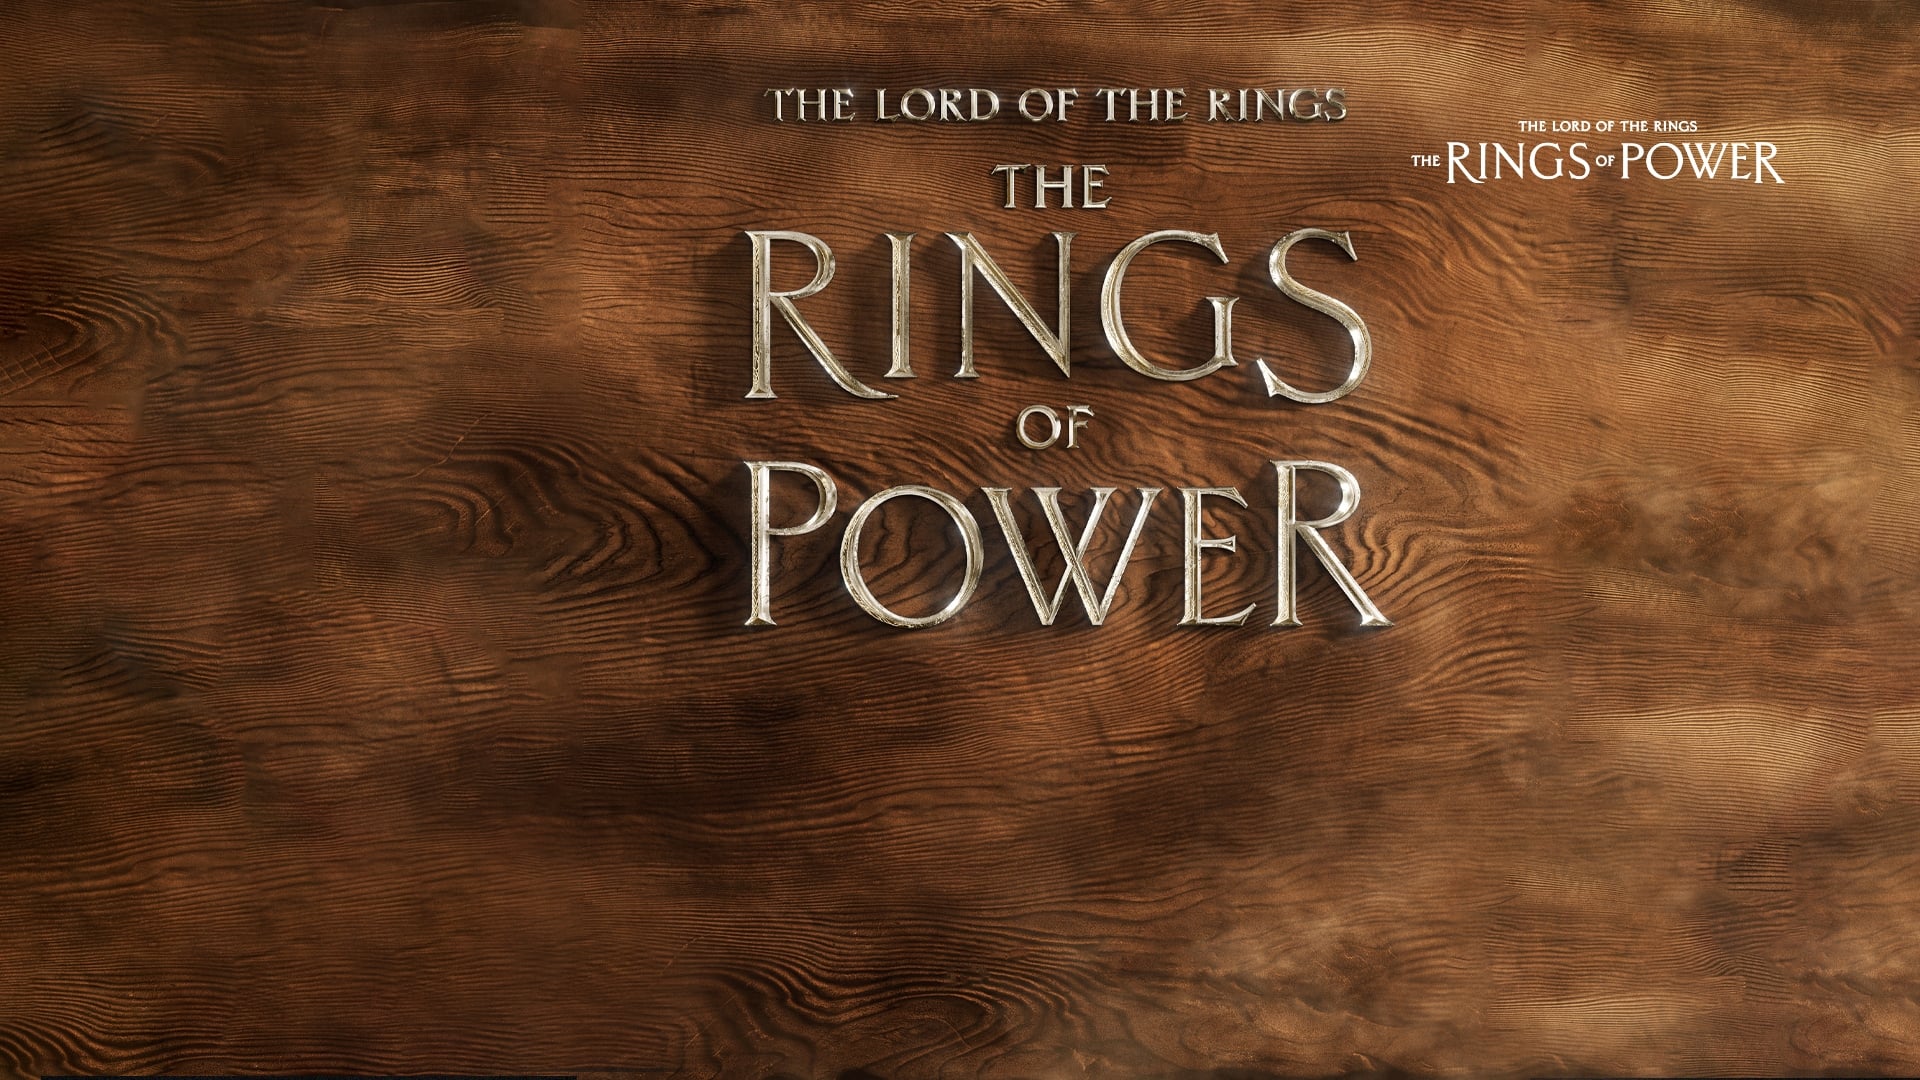 The Lord of the Rings: The Rings of Power - Season 1 Episode 4